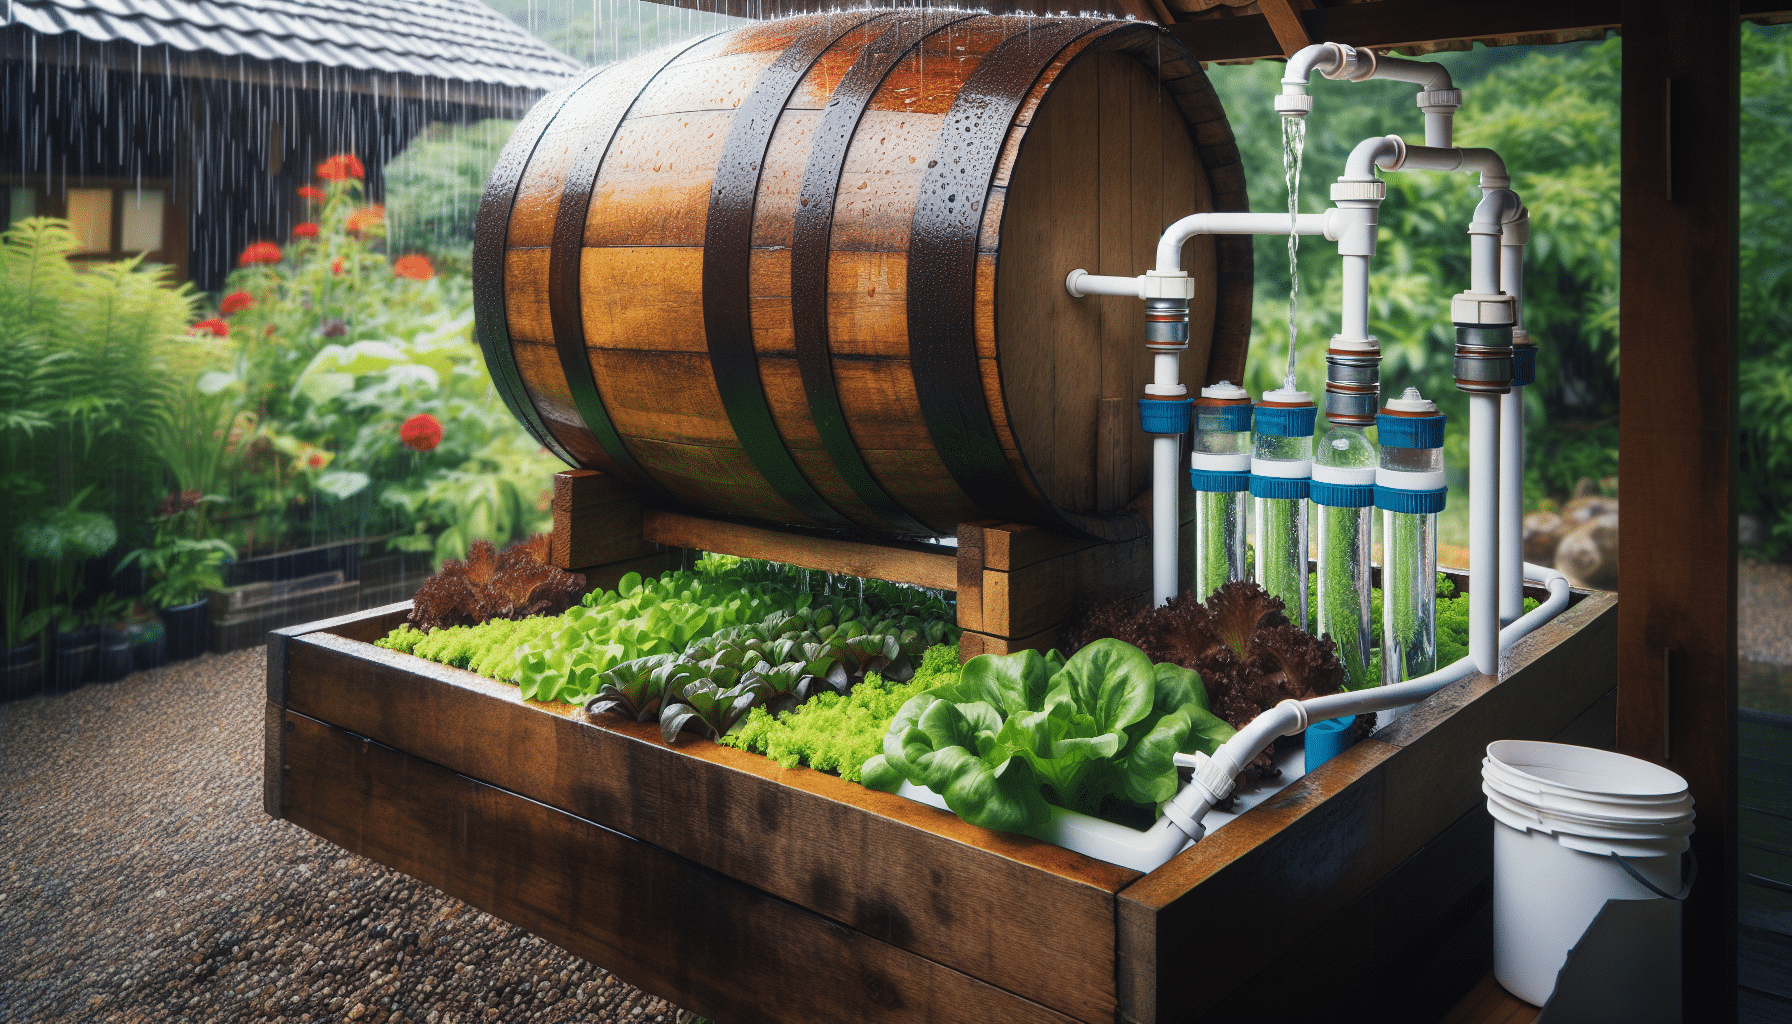 Rainwater collection for hydroponic use